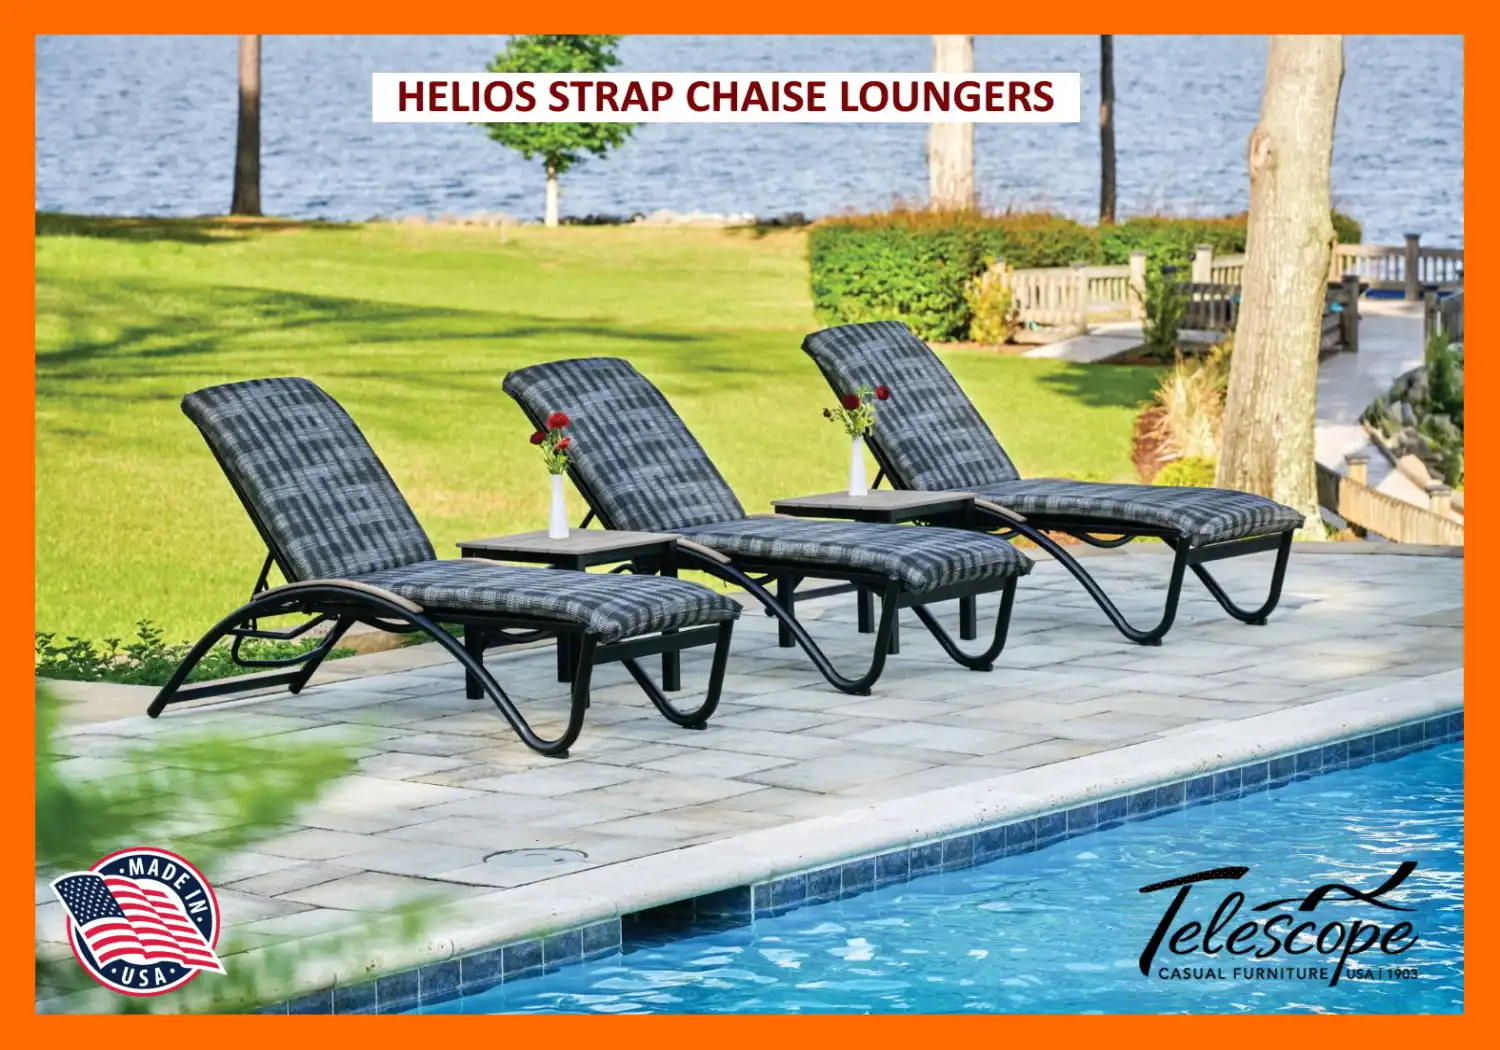 HELIOS STRAP CHAISE LOUNGERS